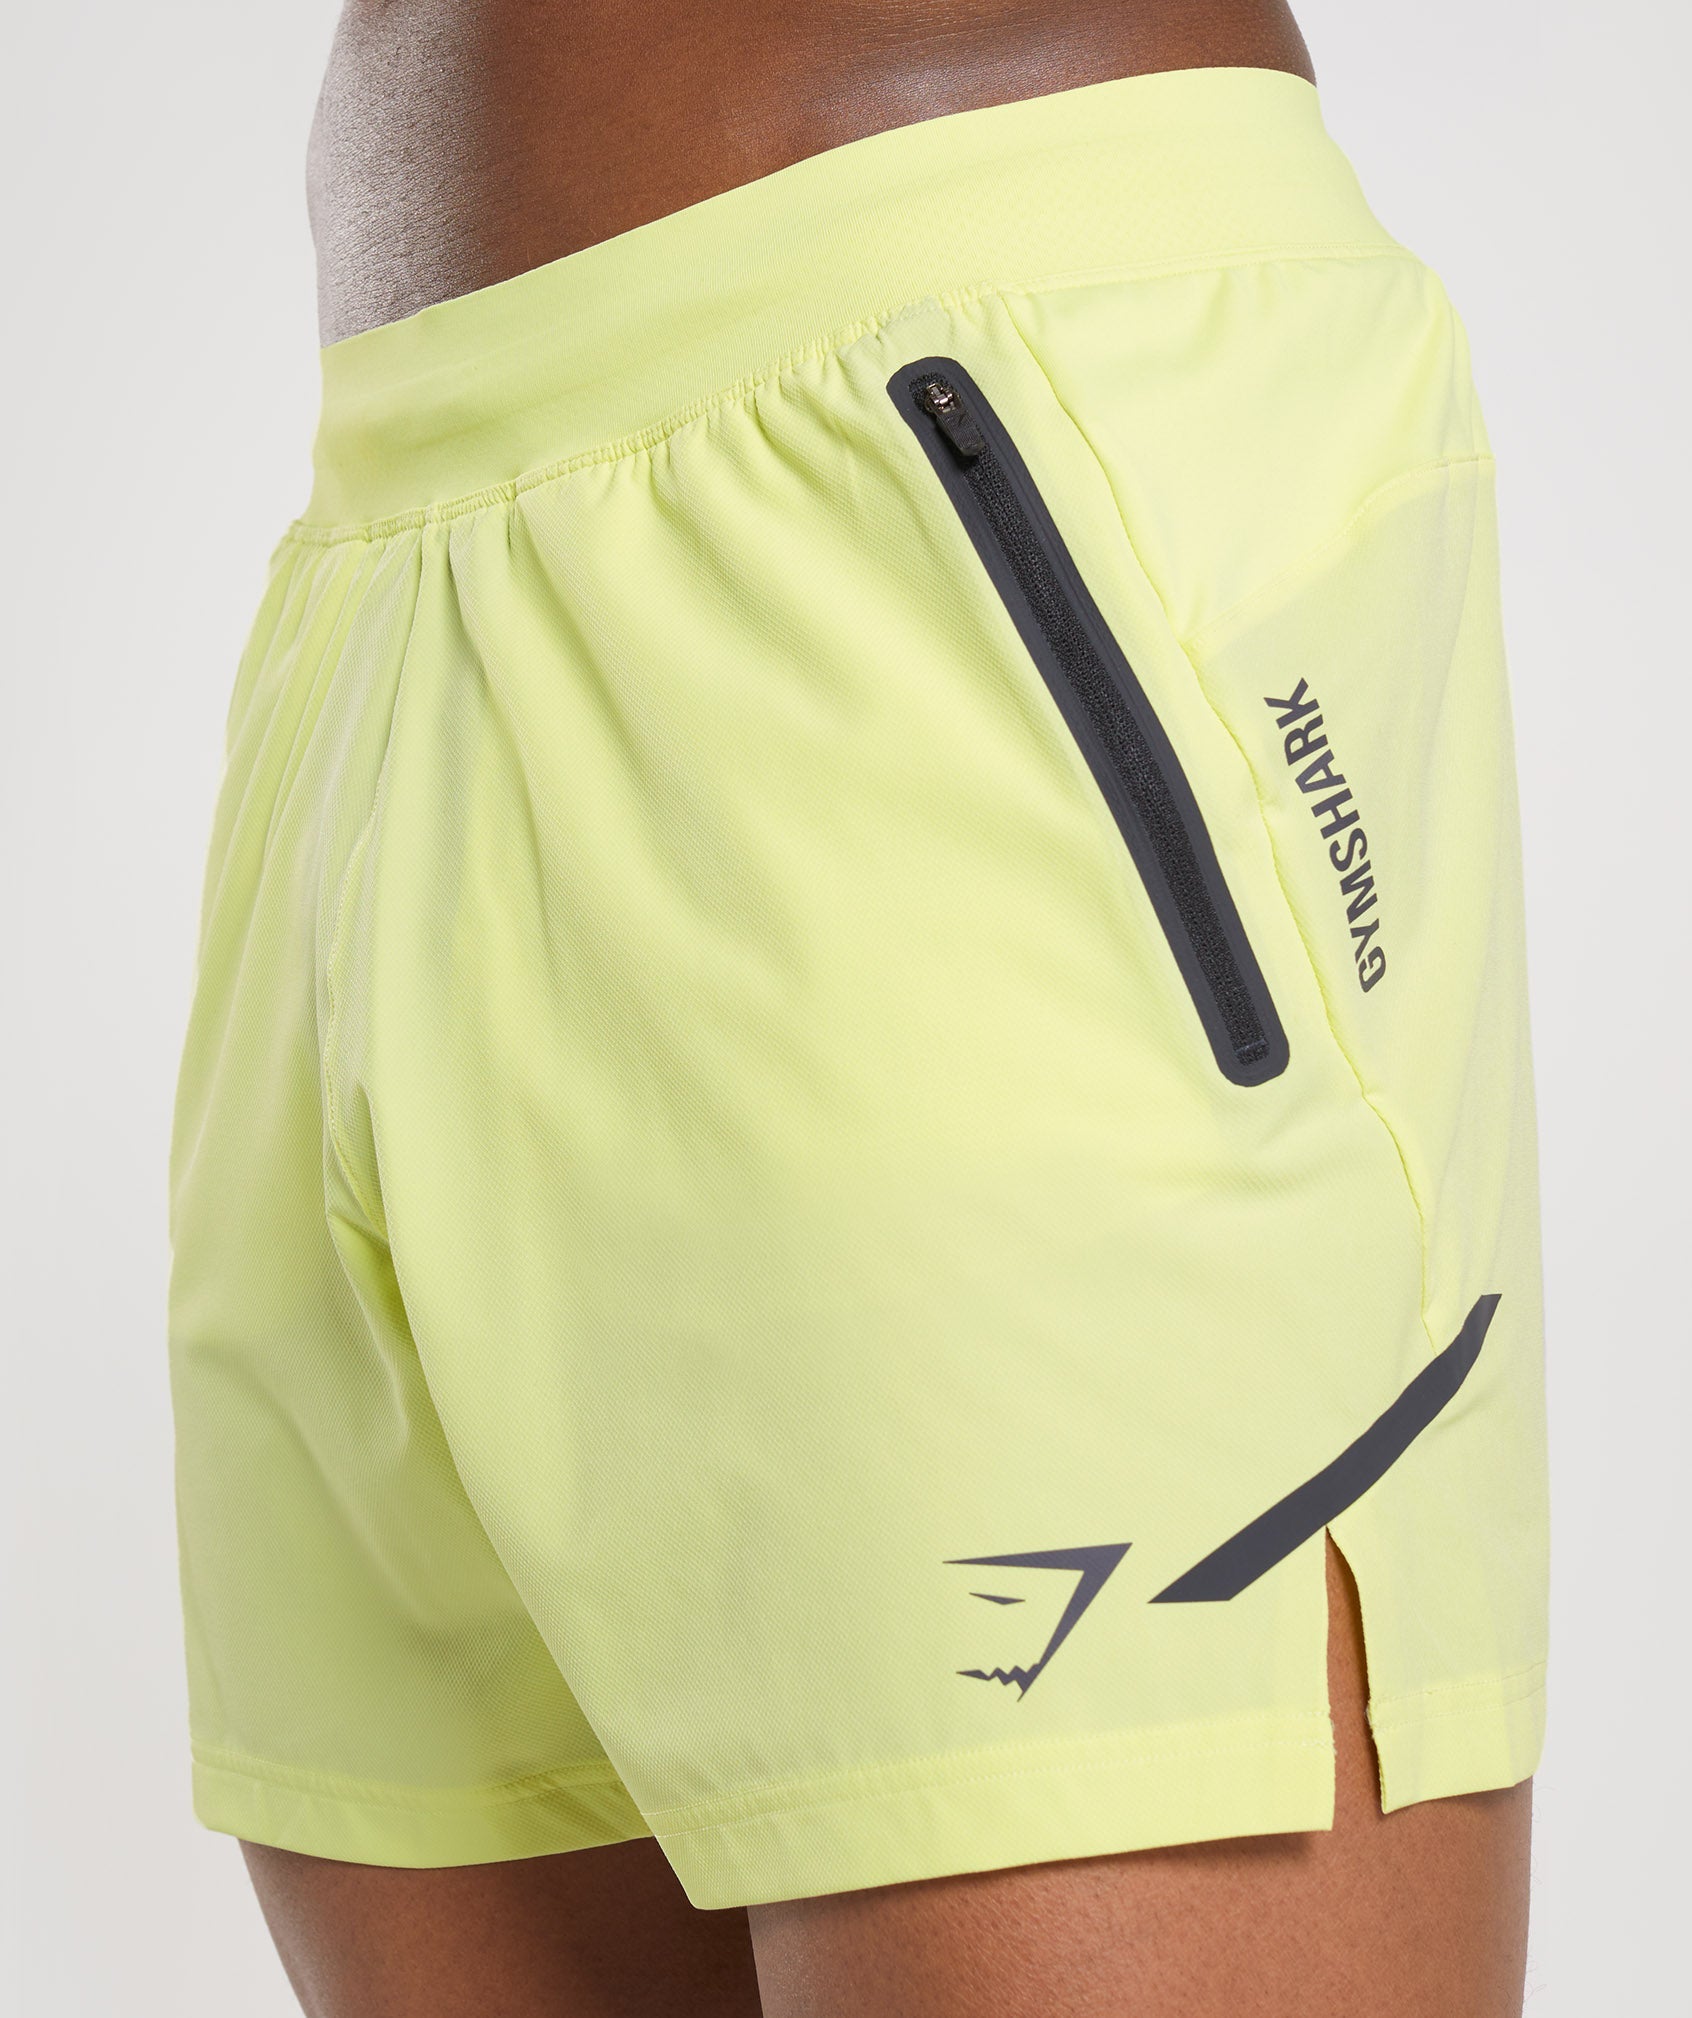 Apex 5" Perform Shorts in Firefly Green - view 5